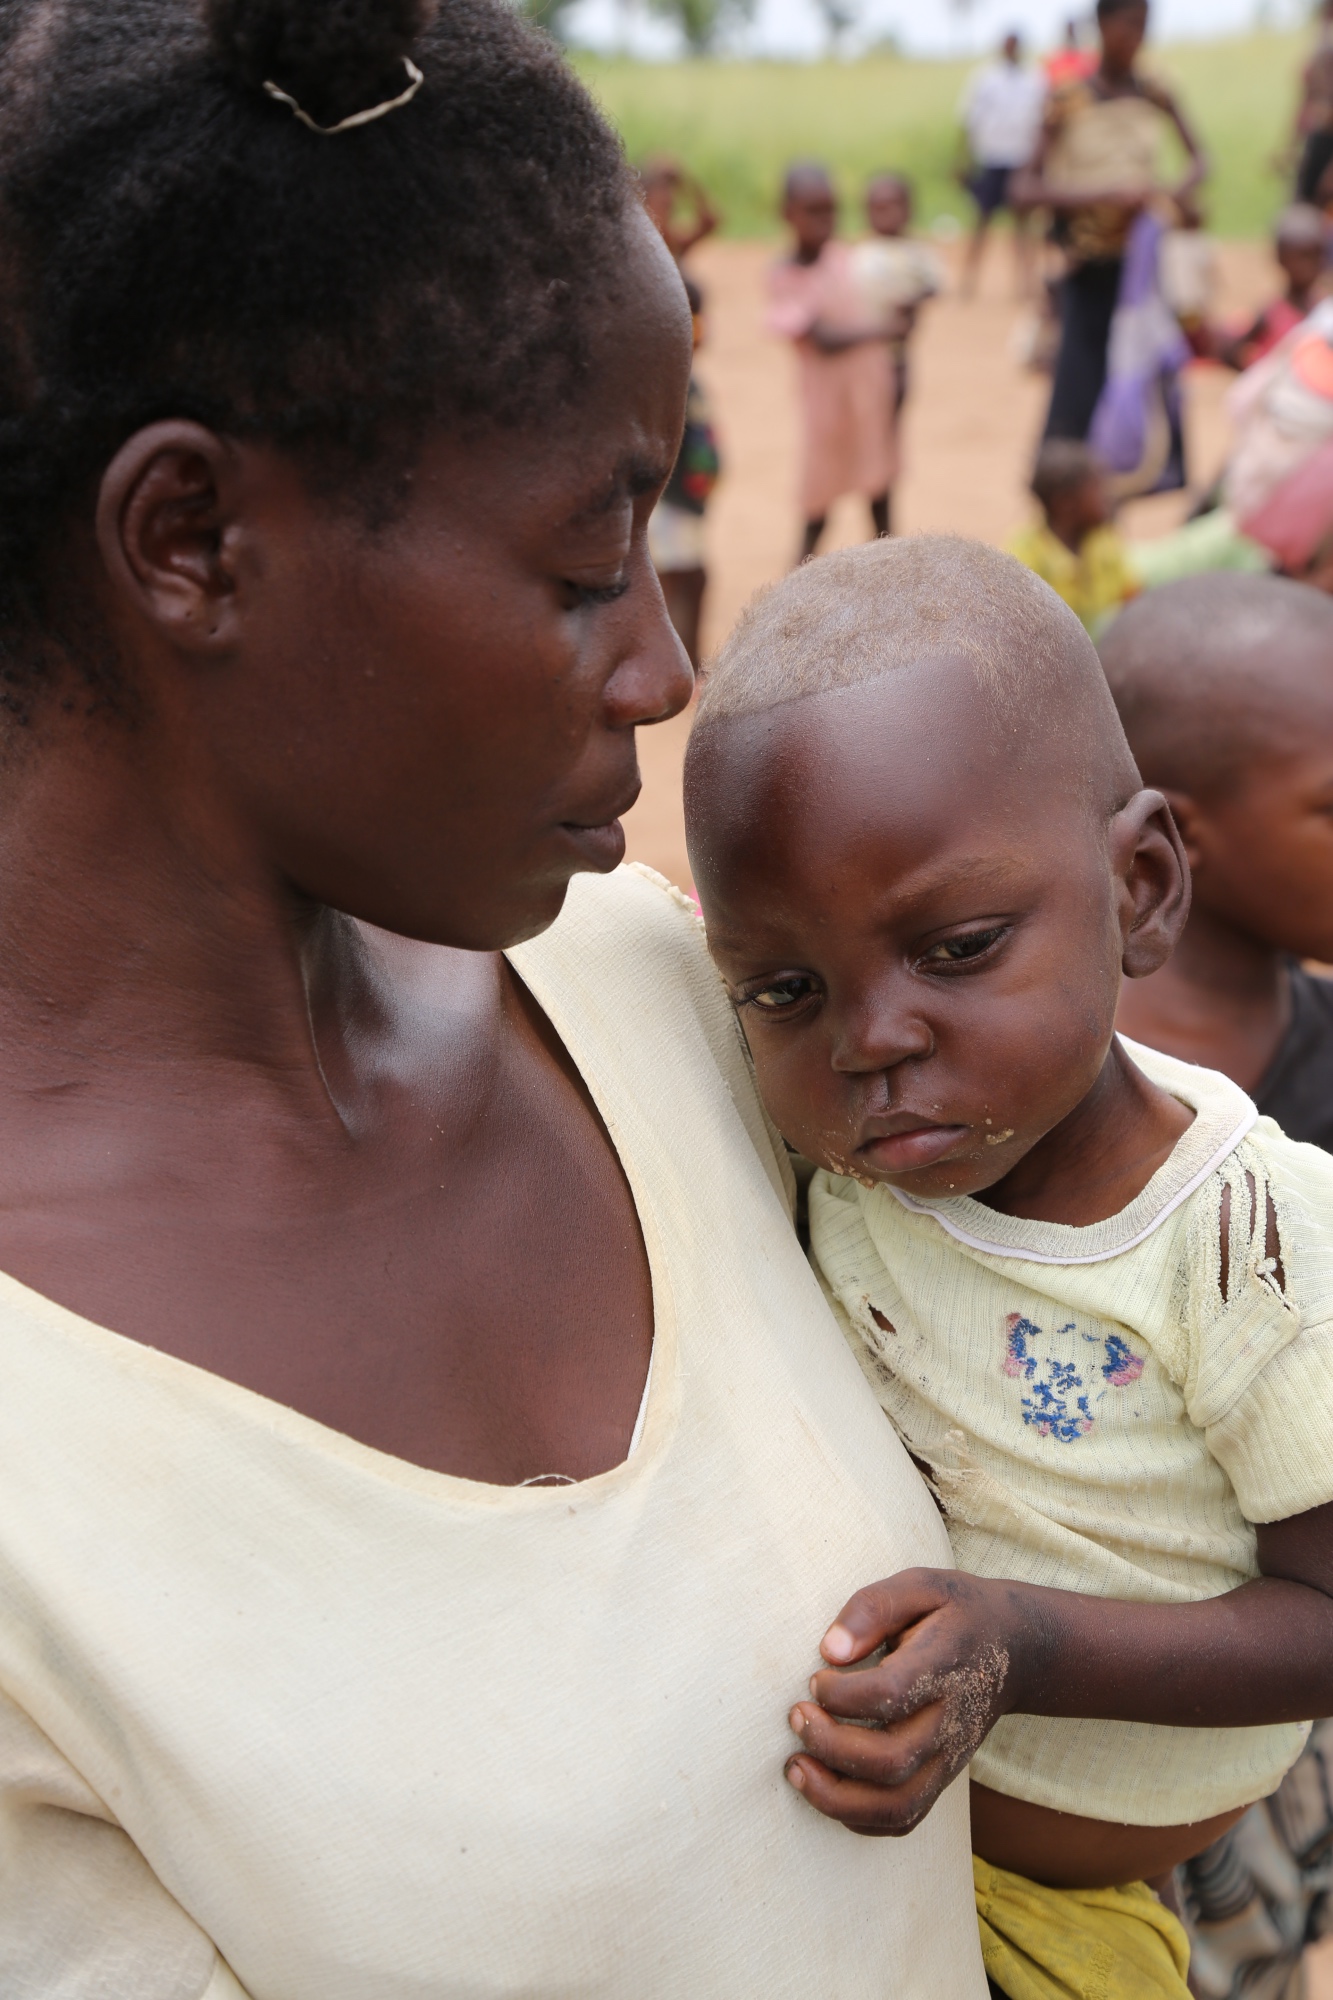 Elizabeth Mbofo, 34, a mother from Kasai in Democratic Republic of Congo and her two year old son, Fwamba. Elizabeth is concerned that her child might die from malnutrition.